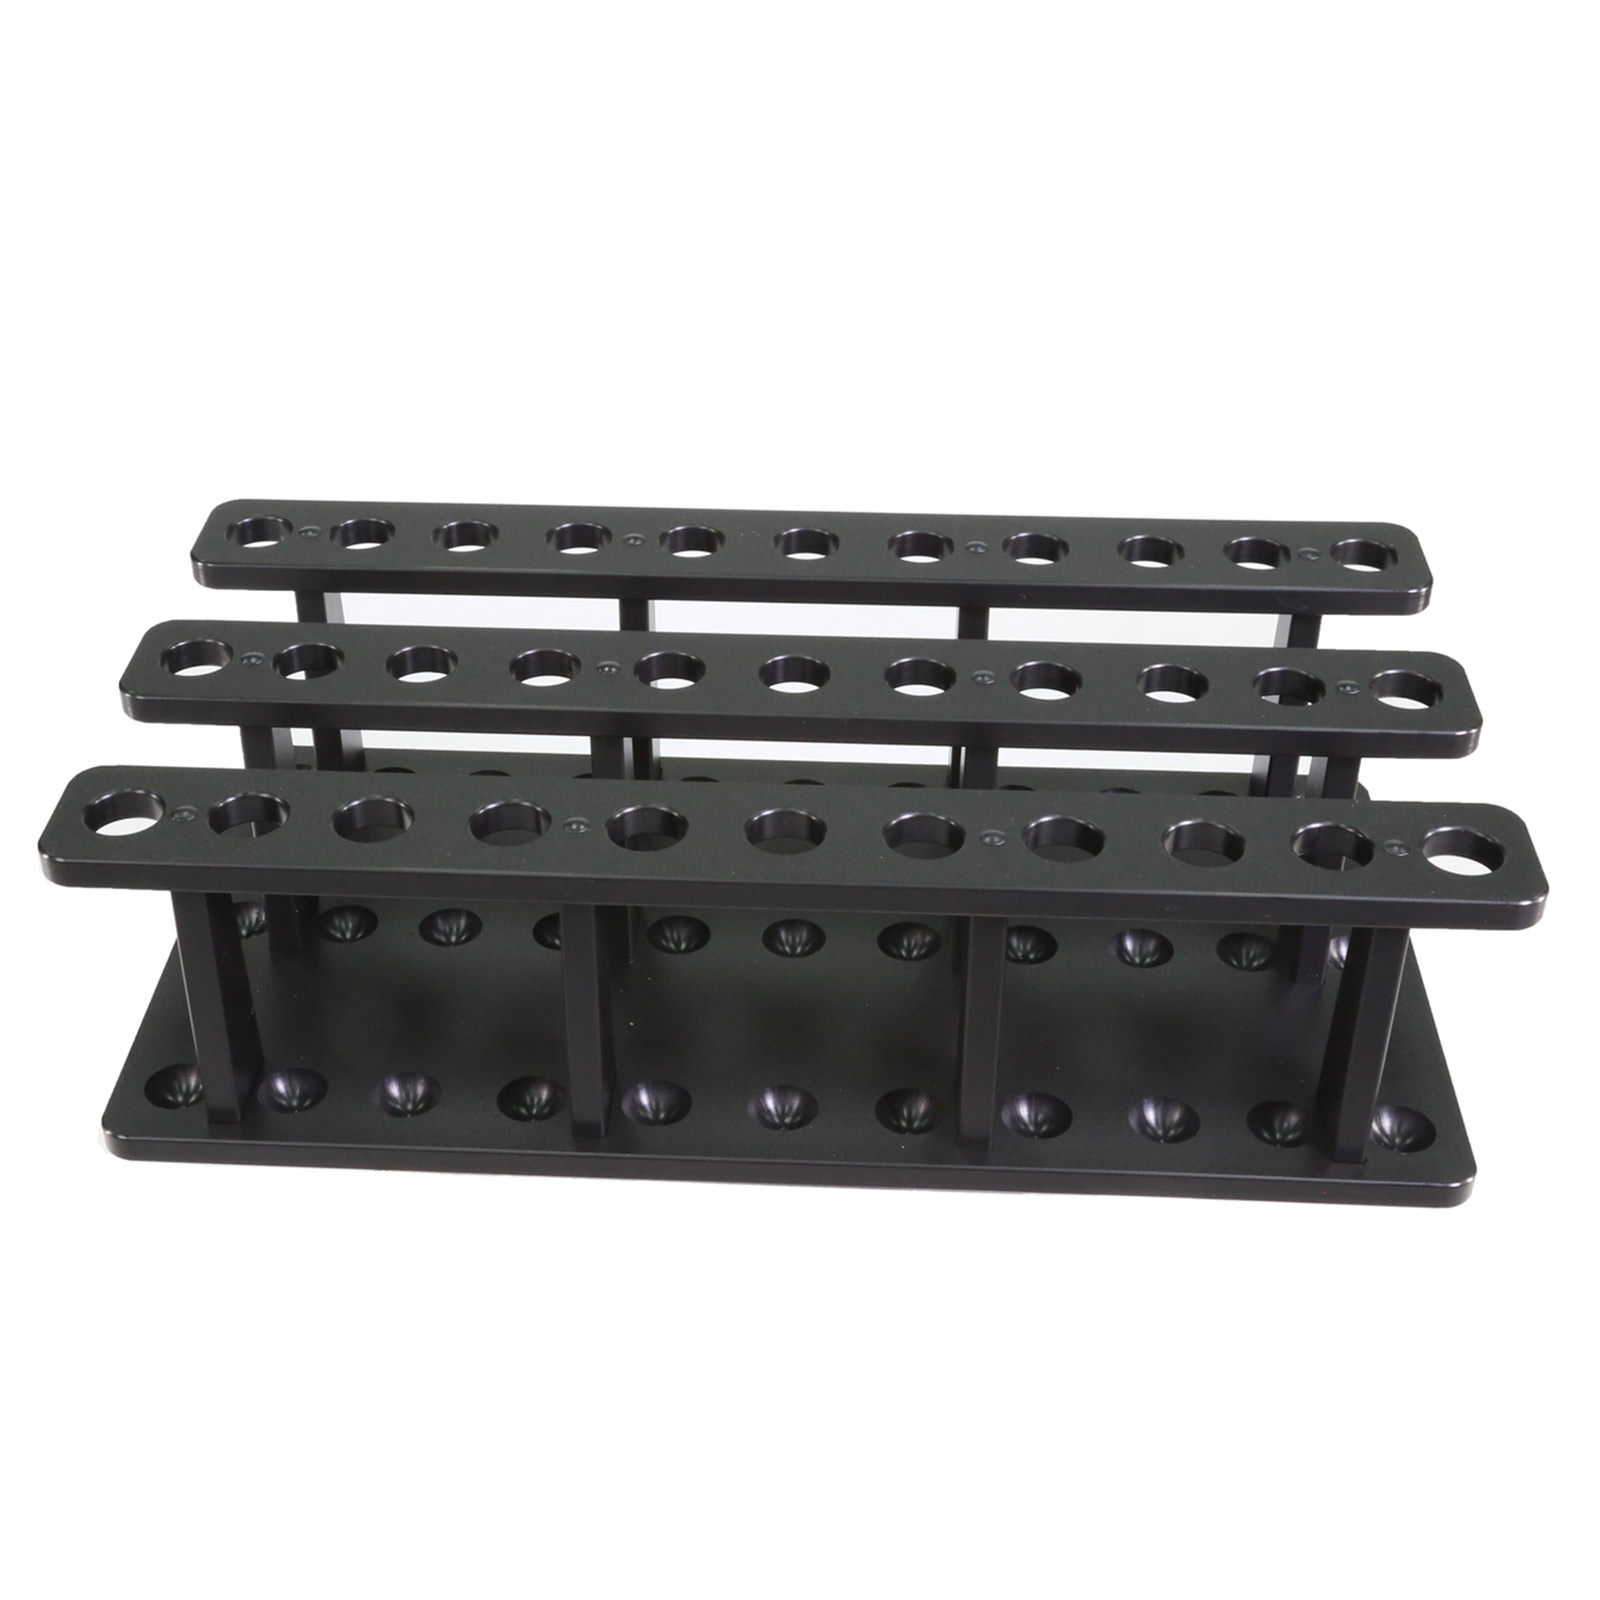 Fishing Rod Holder / Rack * Holds 12 Rods - sporting goods - by